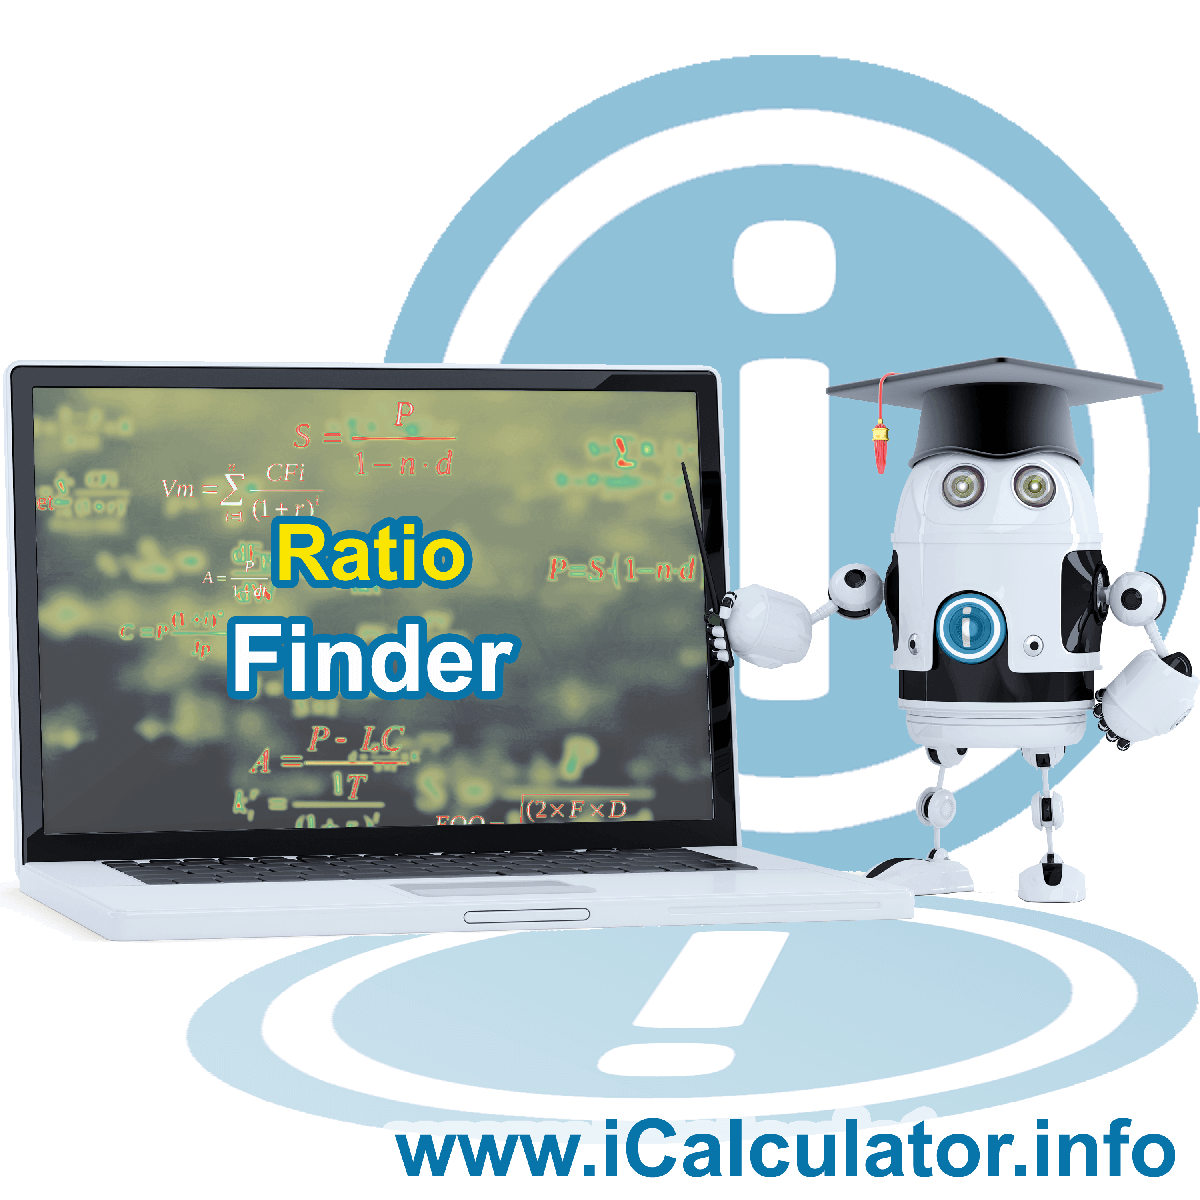 Ratio Finder. This image shows the properties and ratio finder formula for the Ratio Finder